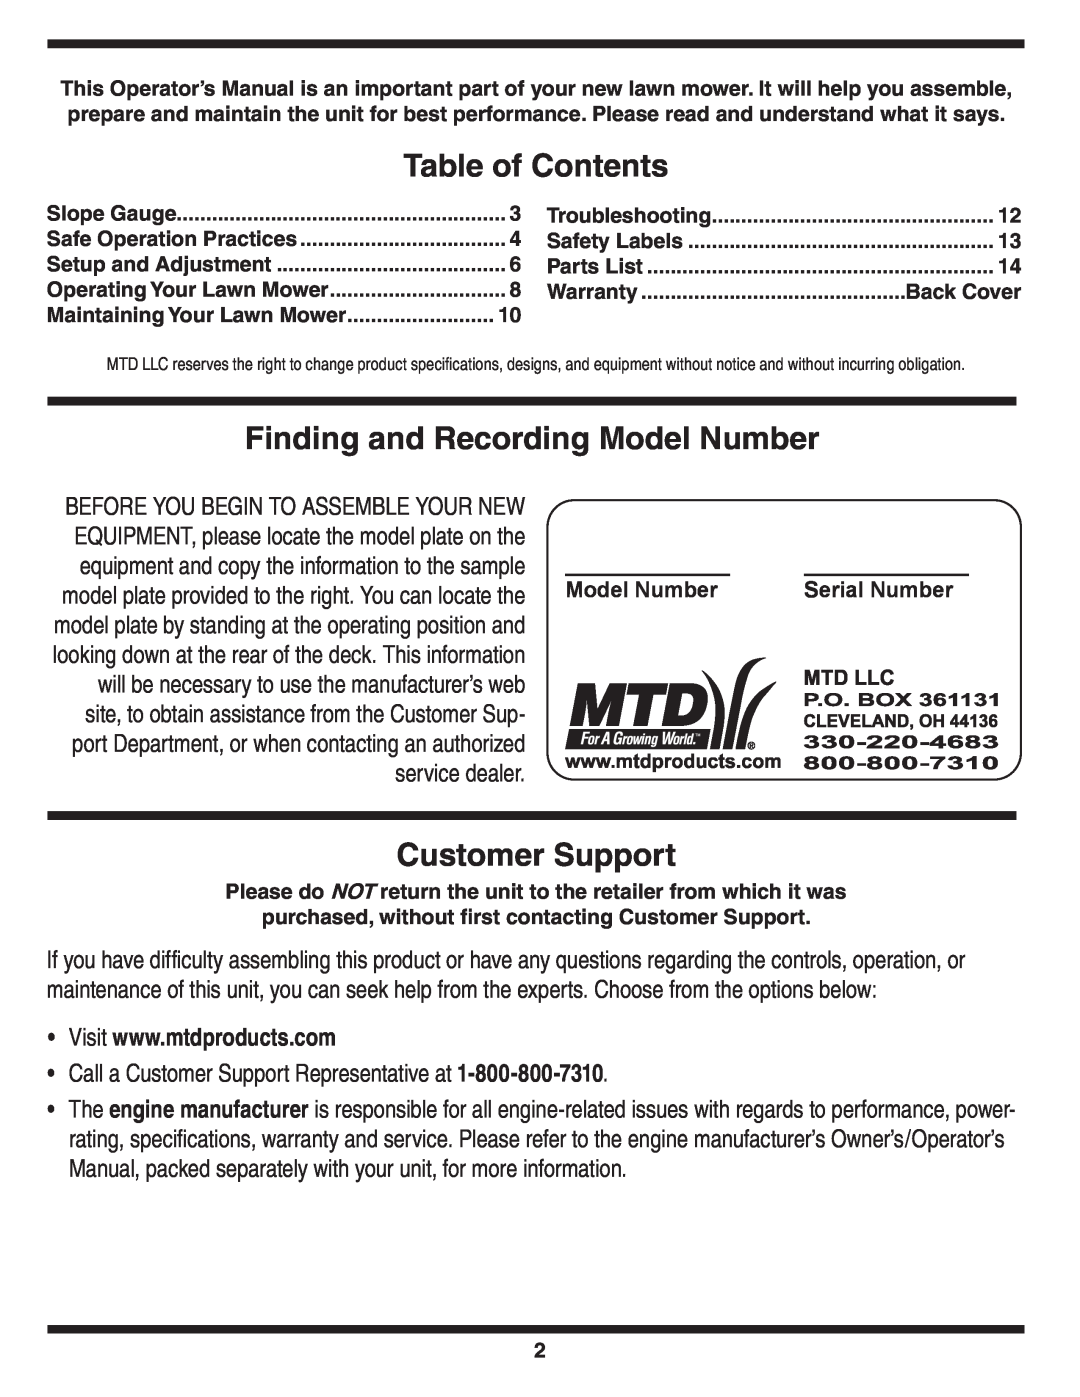 MTD Series 580 Table of Contents, Finding and Recording Model Number, Customer Support, service dealer, Serial Number 